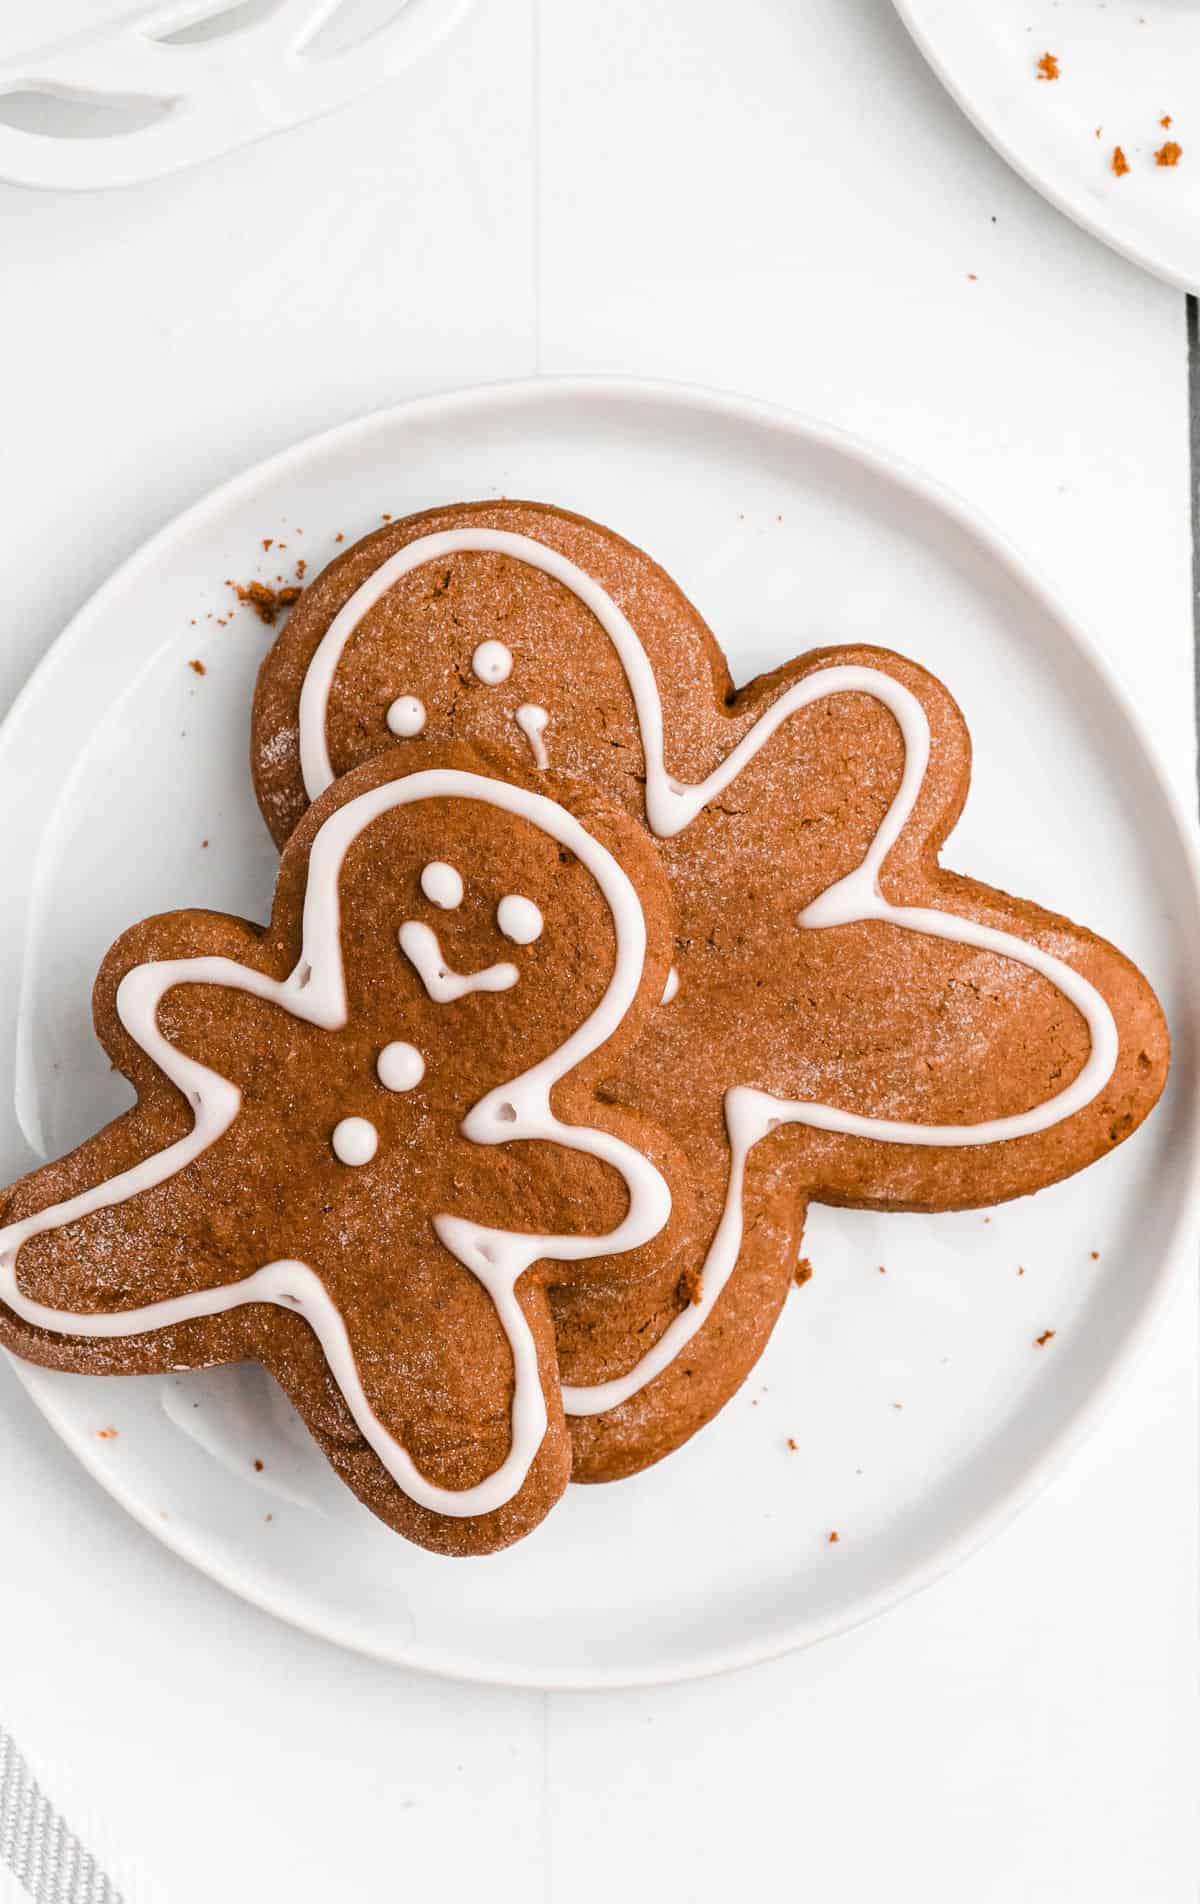 A close up photo of two gingerbread cookies on a white plate.